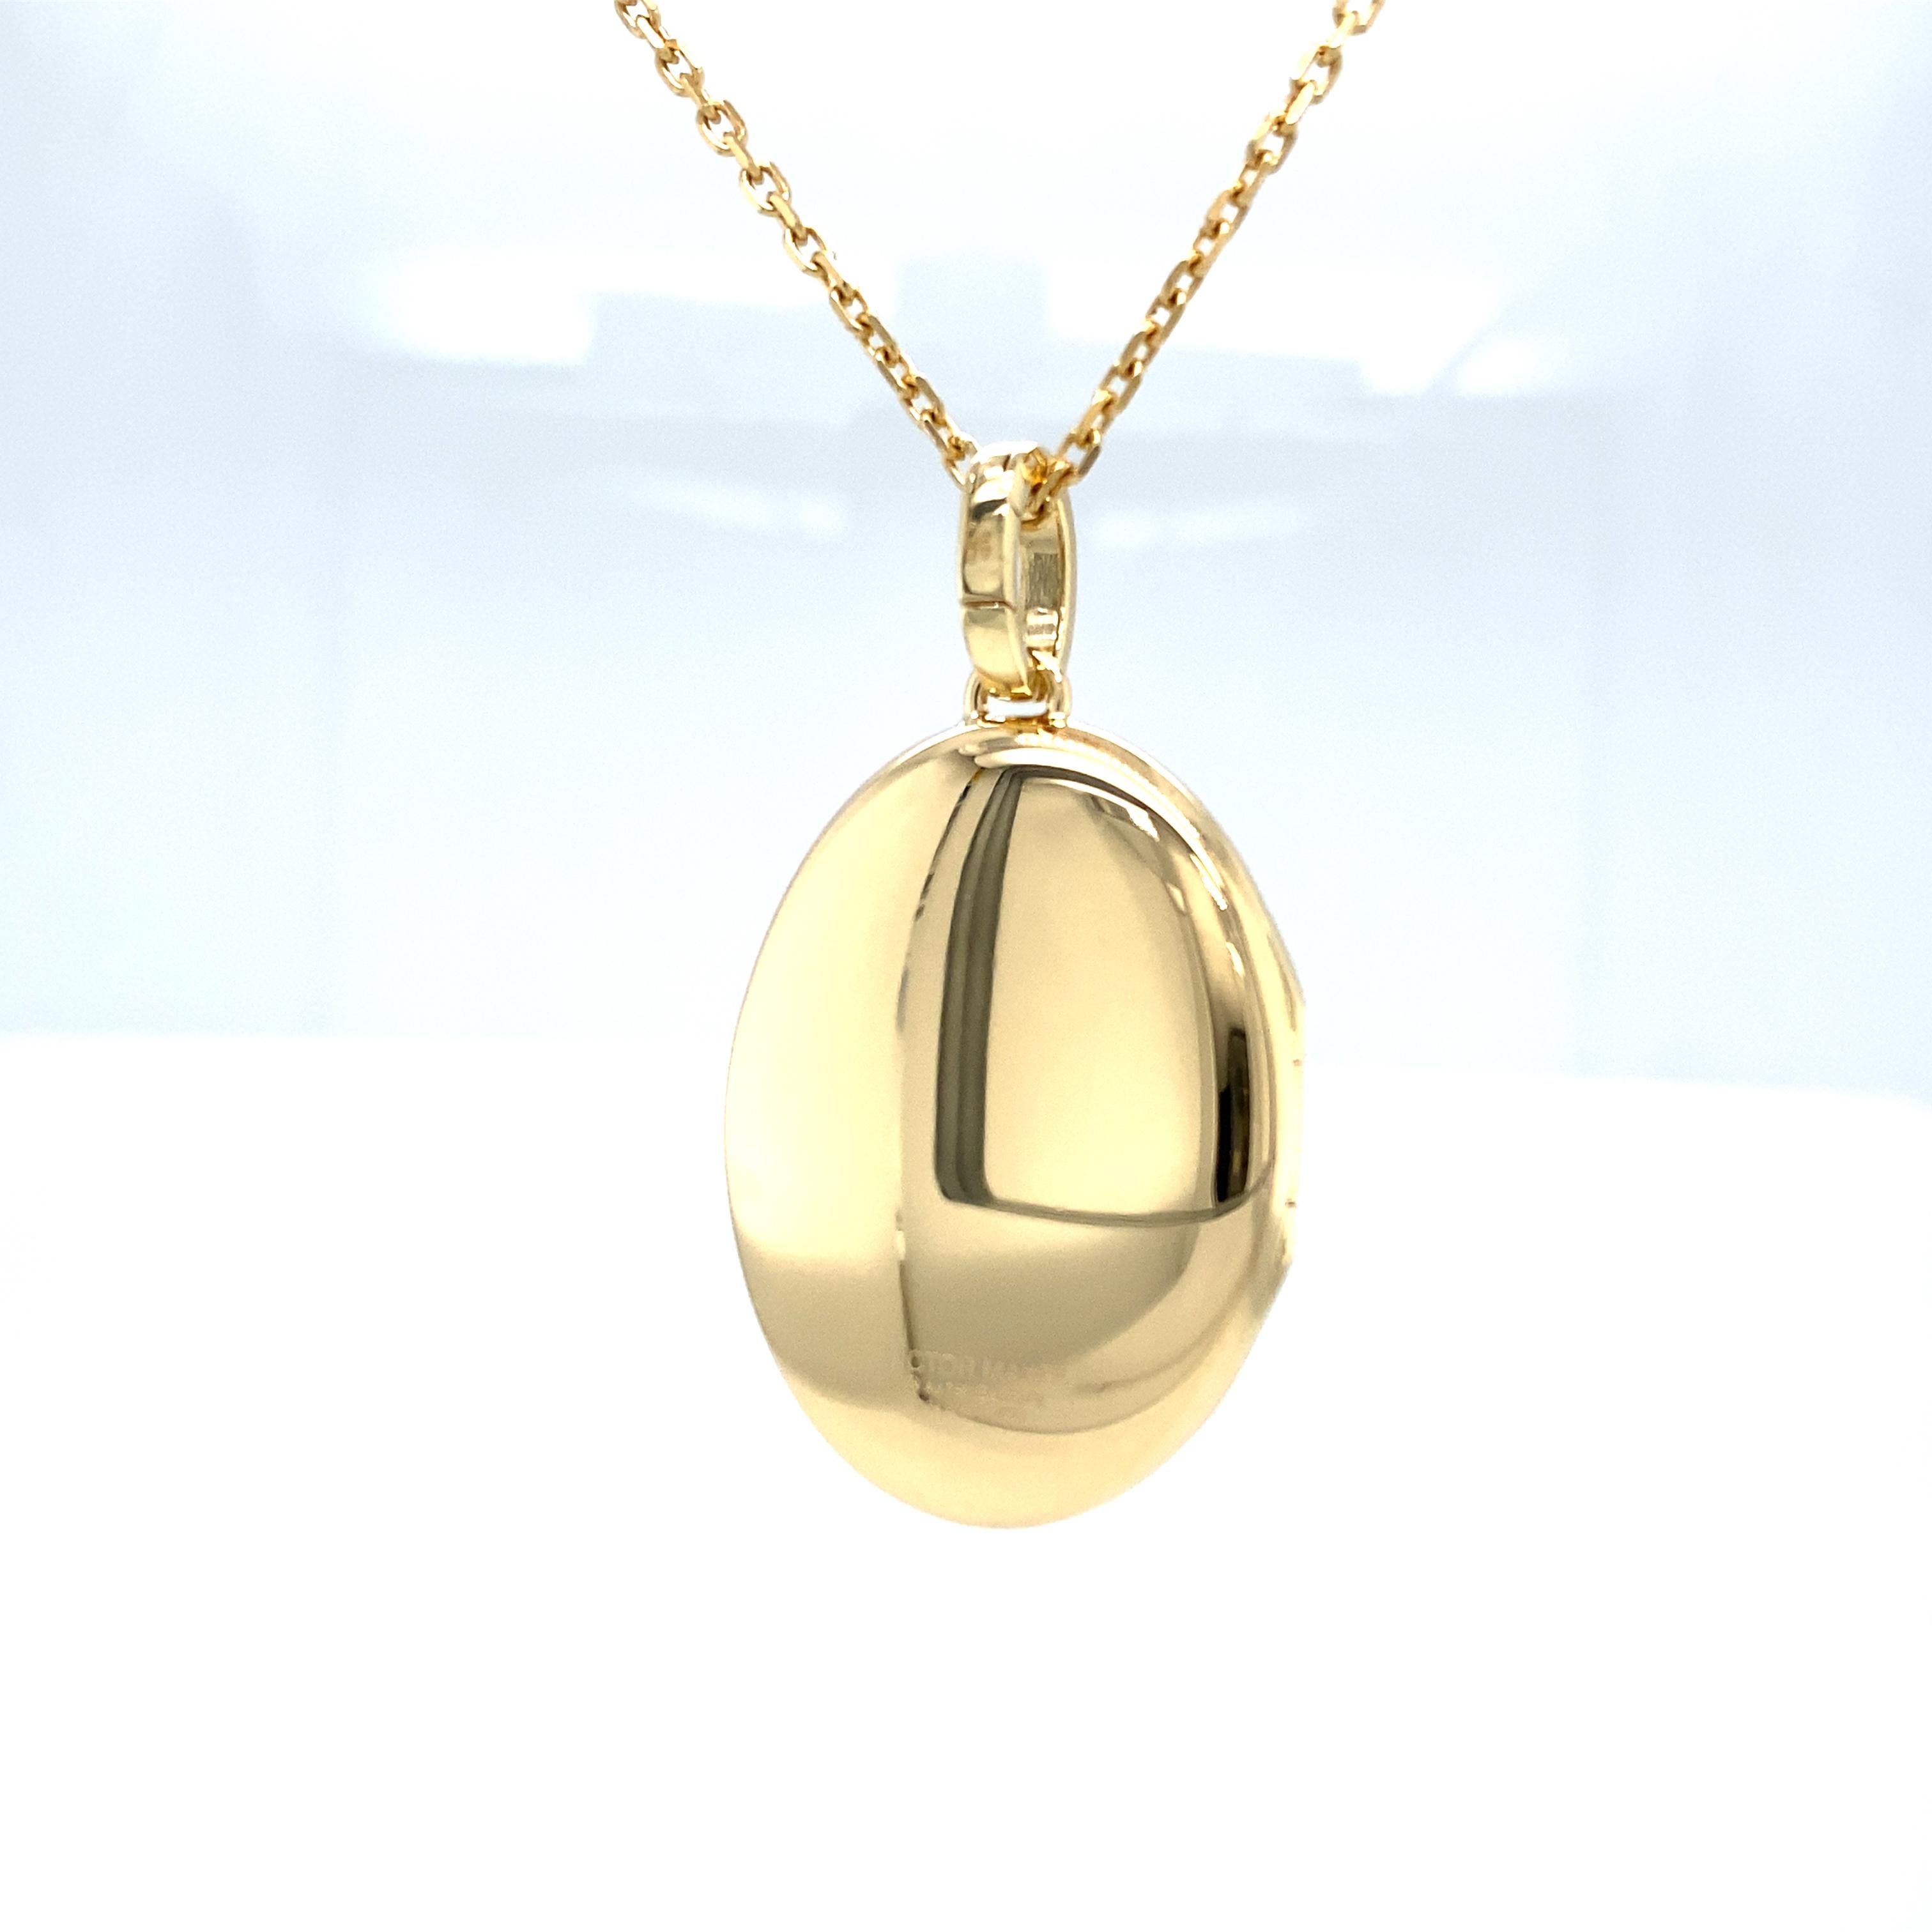 Oval Polished Locket Pendant Necklace - 18k Yellow Gold - 9 Diamonds 0.14ct G VS For Sale 5